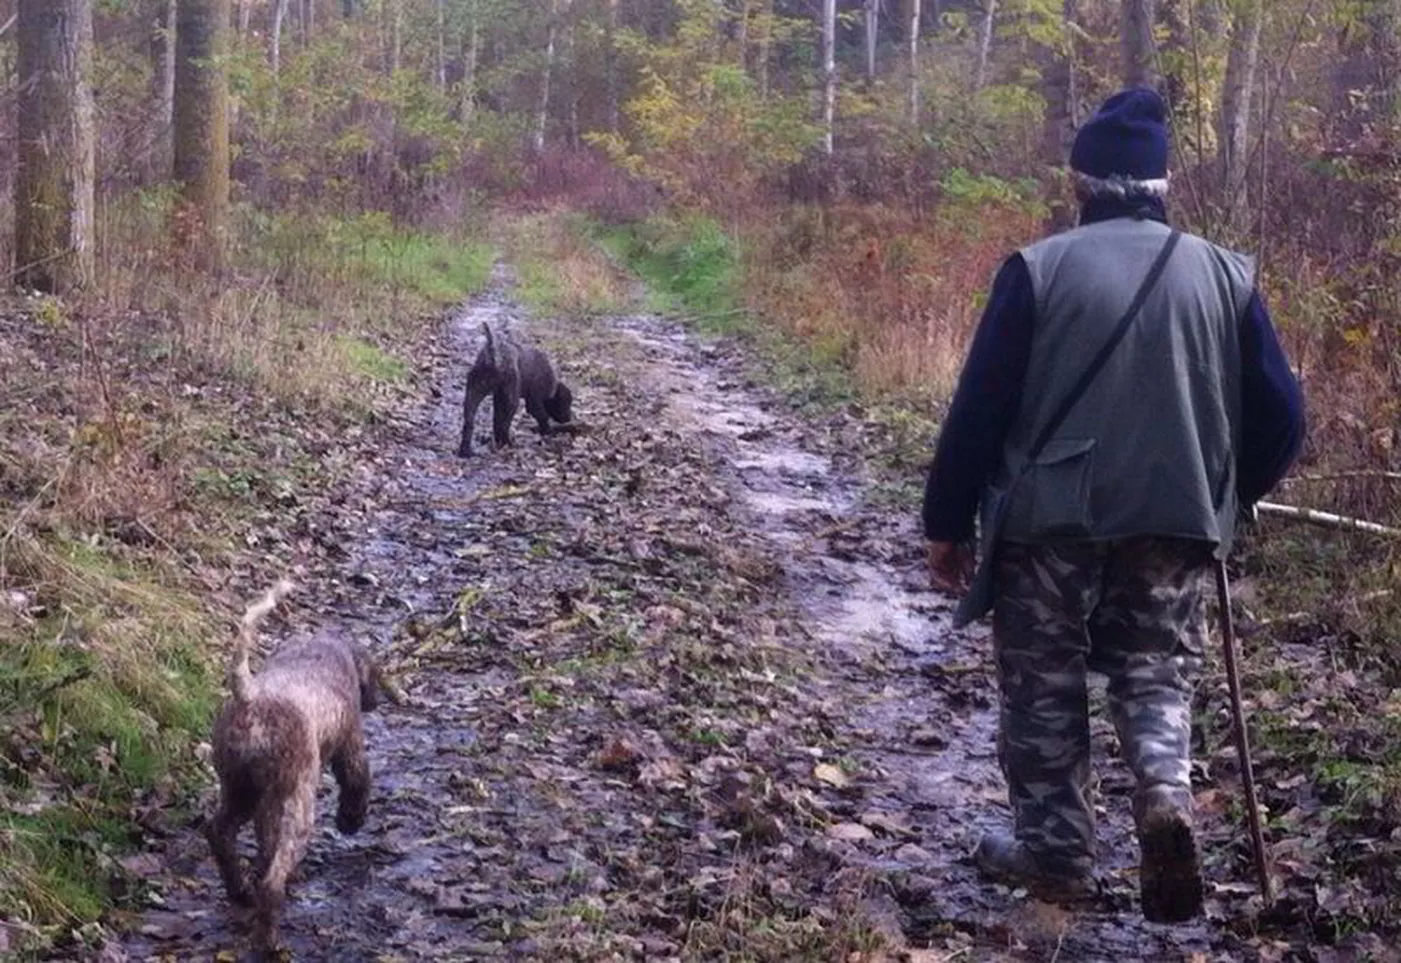 Truffle hunting from Turin